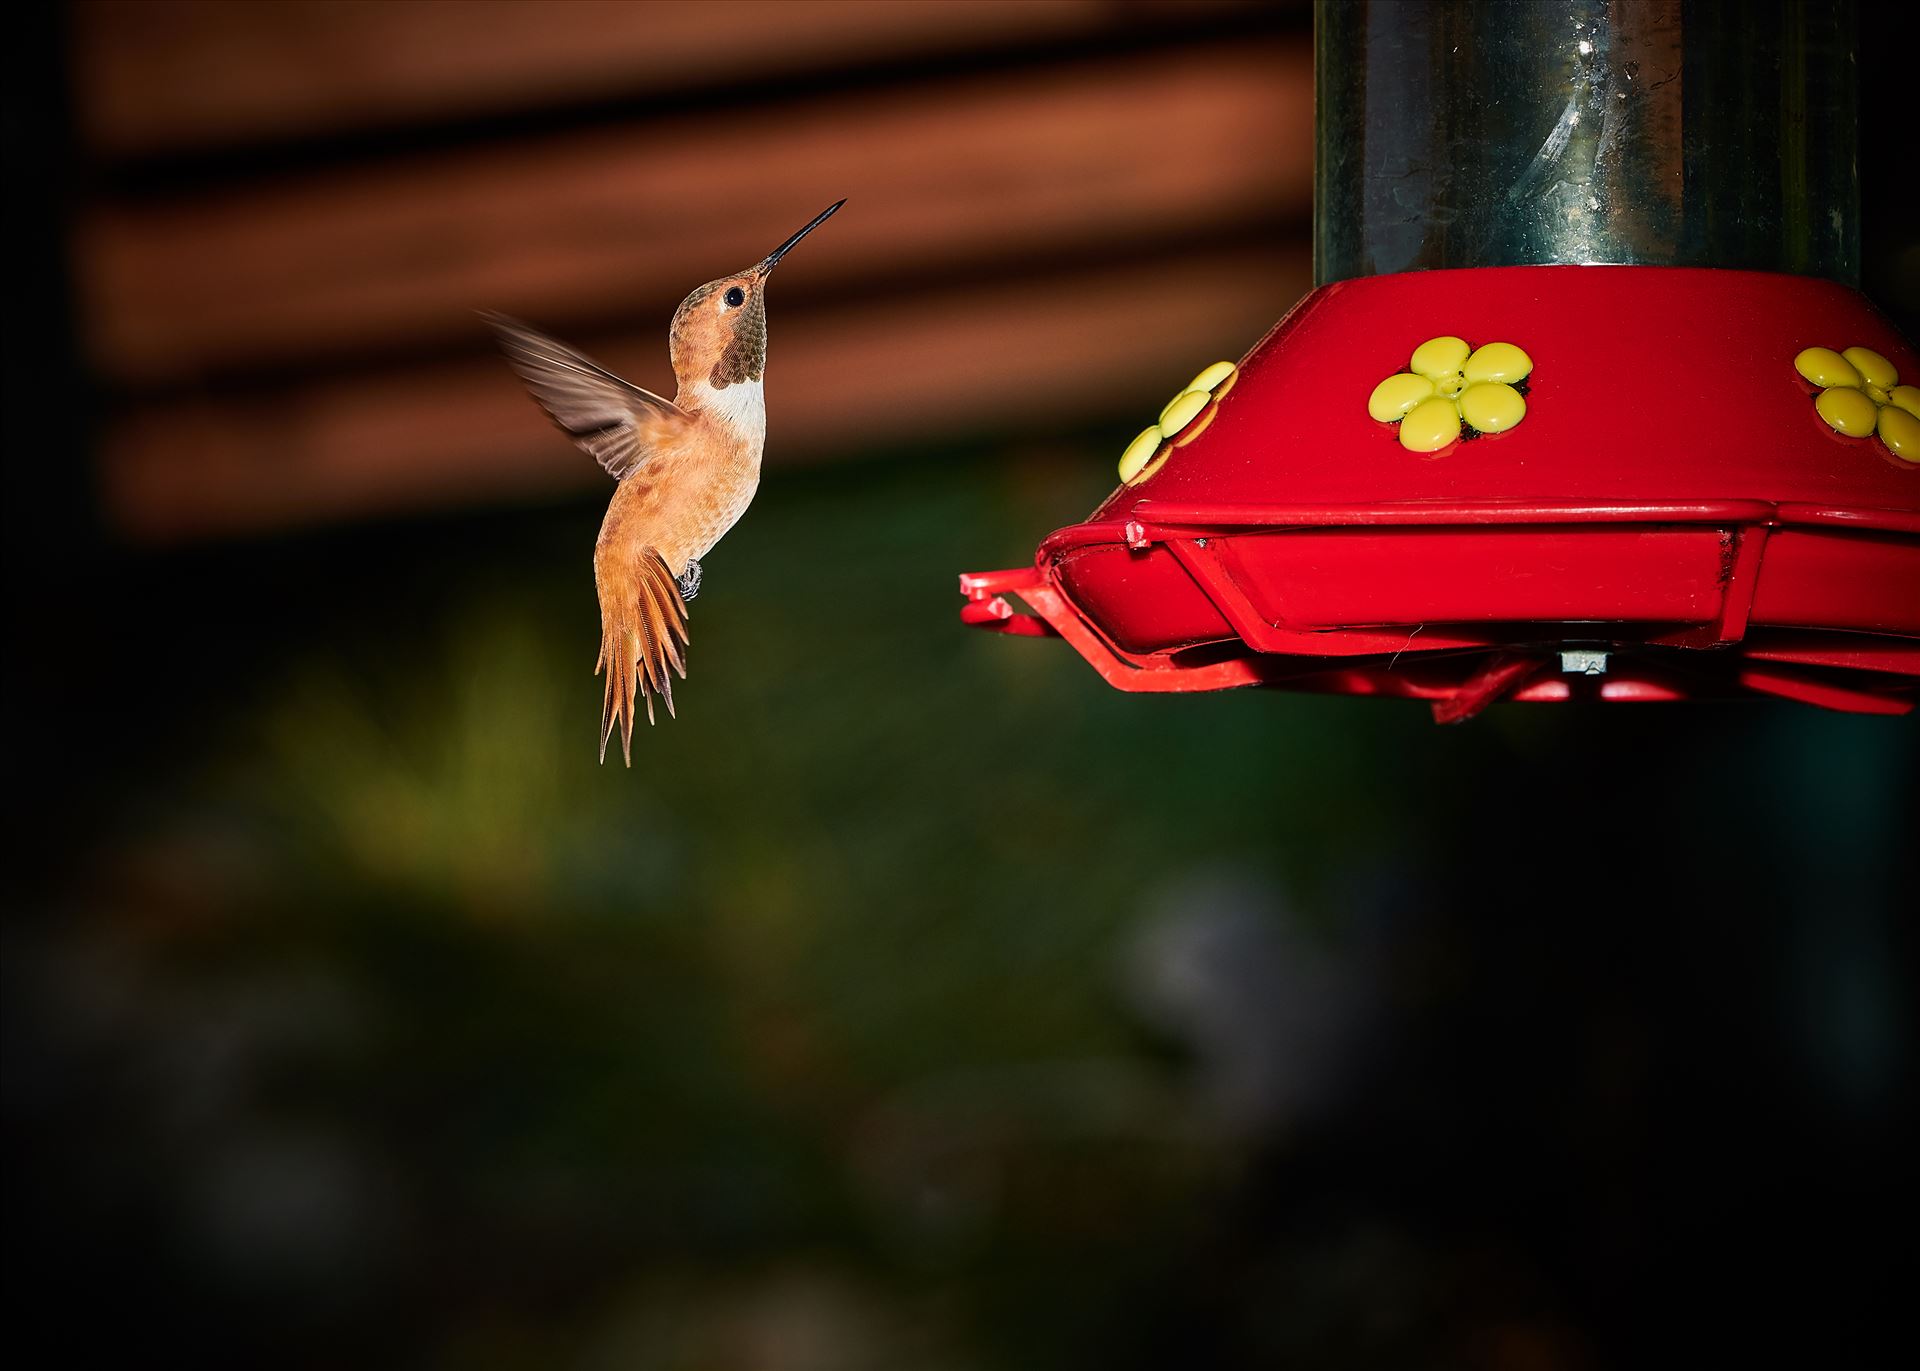 hummingbird hovering near feeder 8500590 ss as sf.jpg - Hummingbird hovering near feeder, Cloudcroft New Mexico, Lincoln National Forest by Terry Kelly Photography